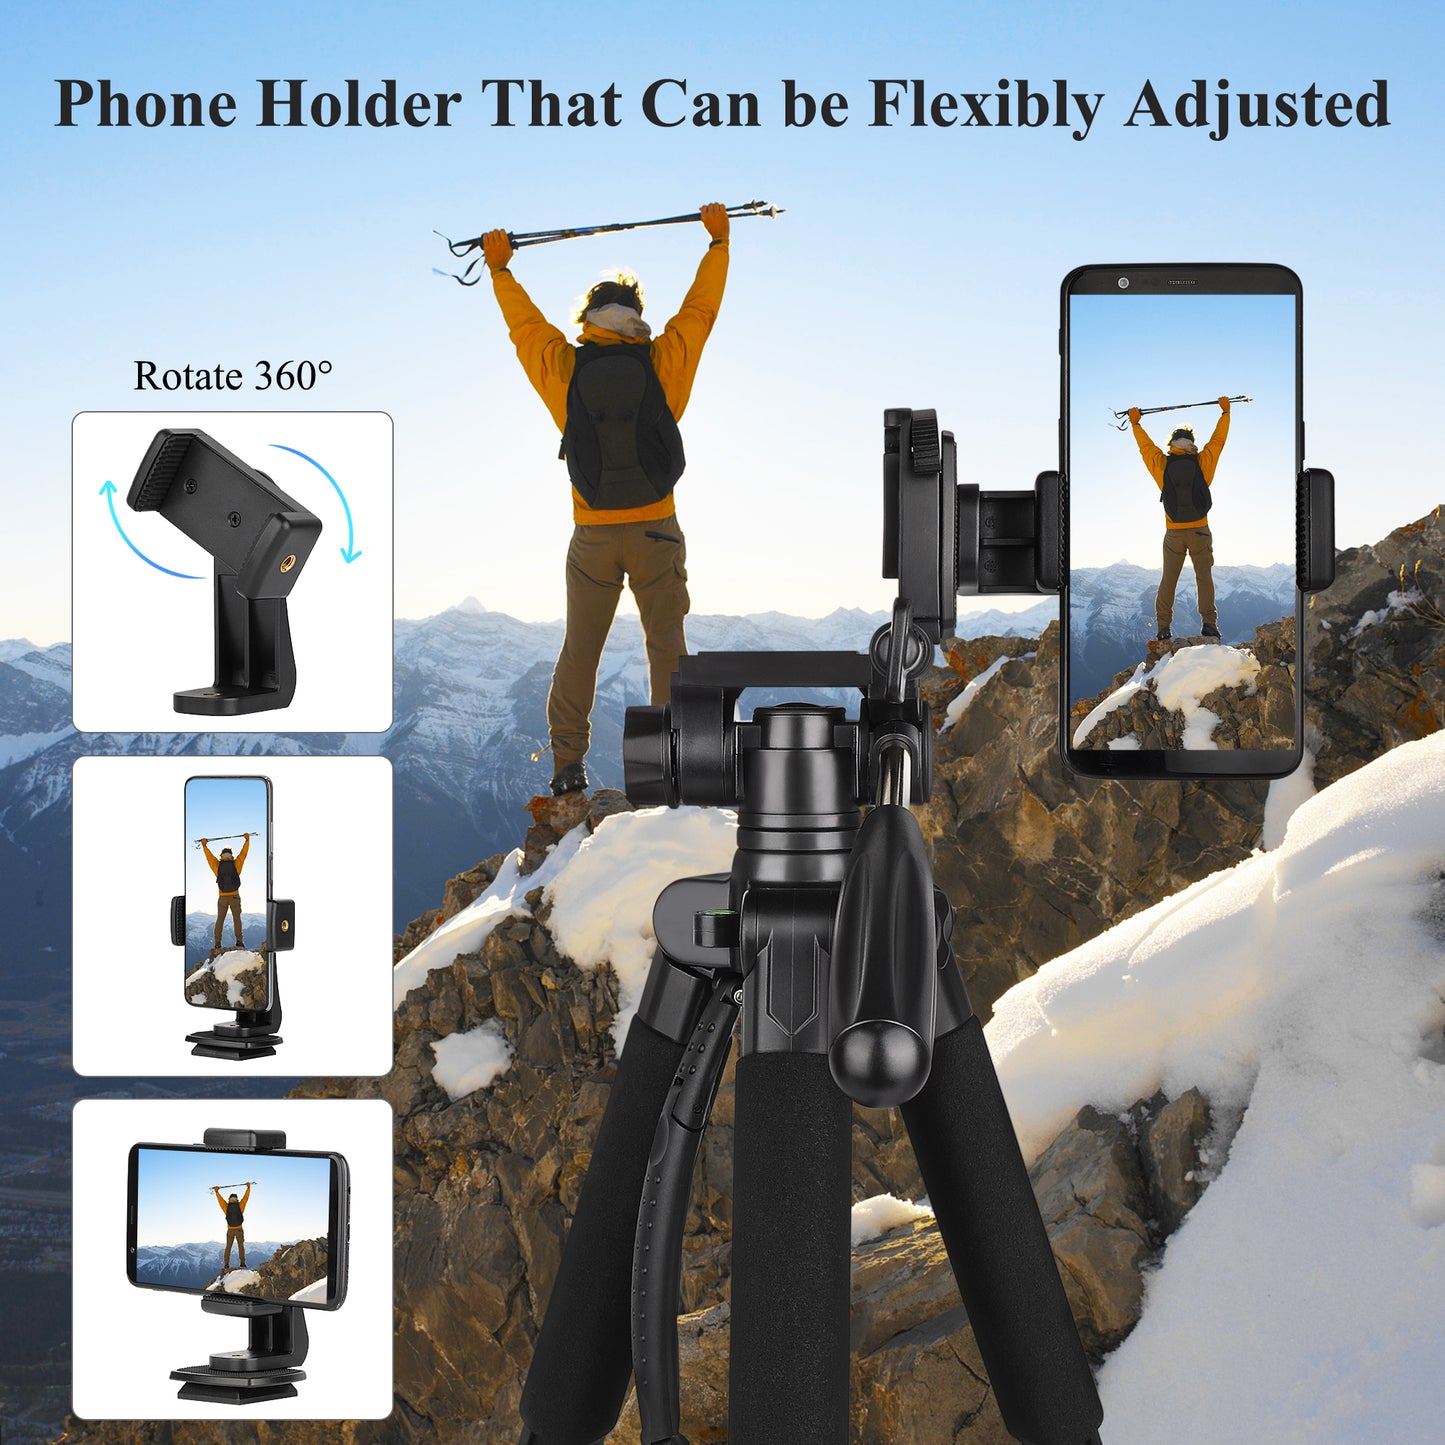 74" Camera Tripod Stand, VICTIV Phone Tripod with Handle and Phone Holder, Lightweight Aluminum Video Tripod,Compatible with Canon/Nikon/Sony Cameras, Max Load 14lbs (New NT70 Black)